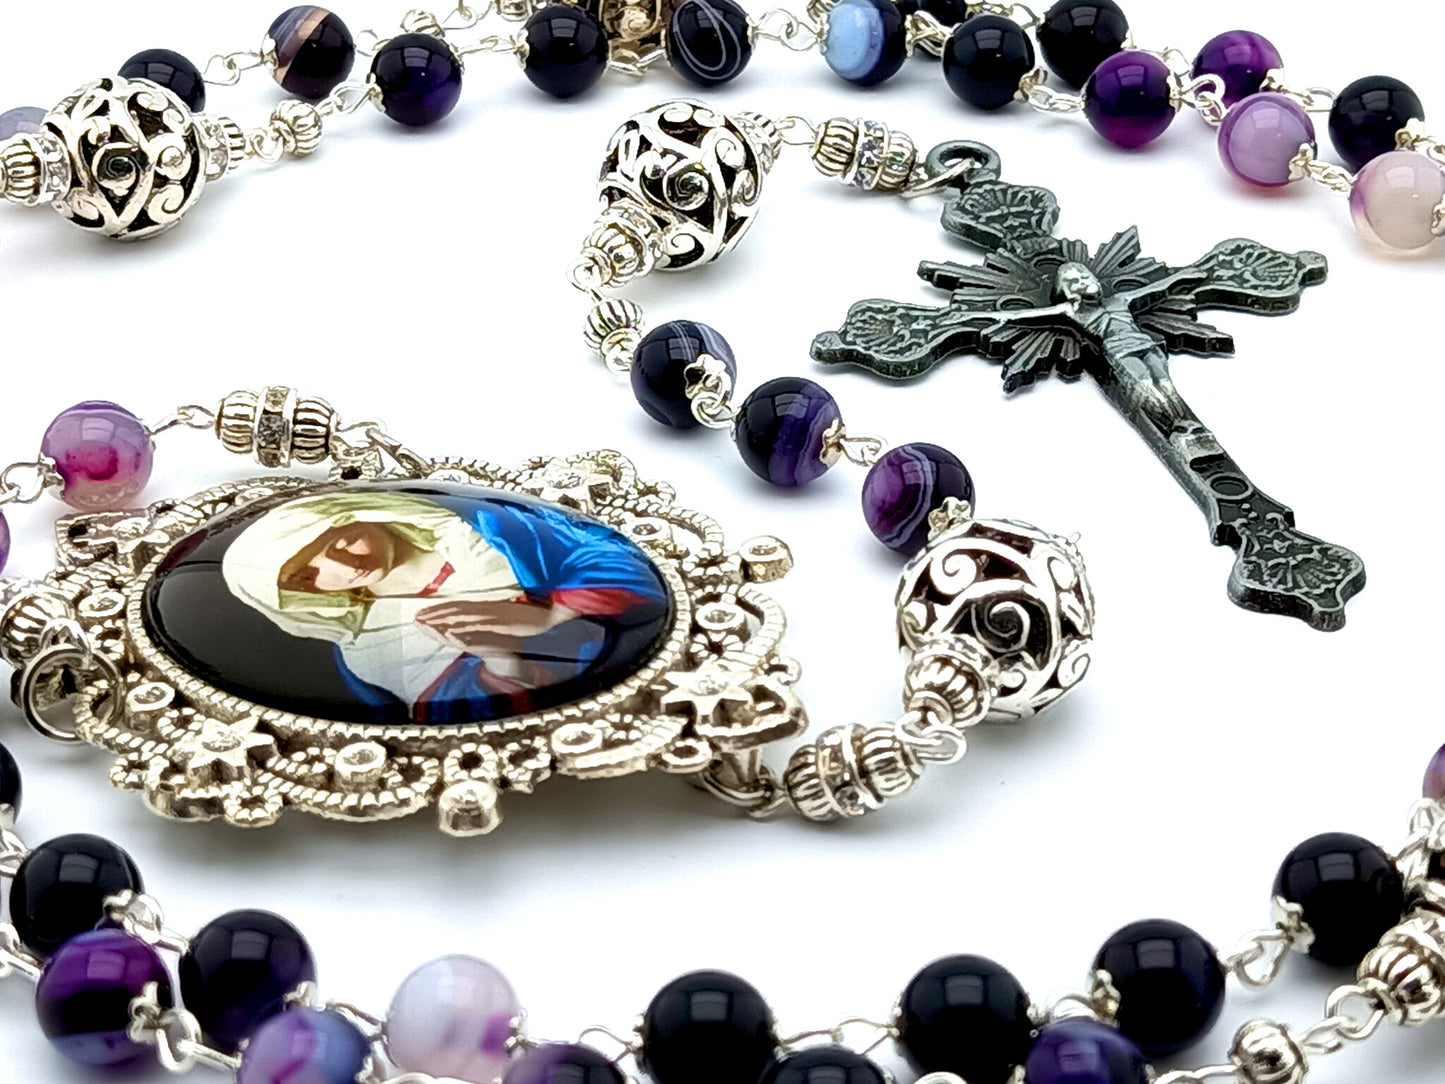 Virgin Mary unique rosary beads with purple agate gemstone beads, silver pater beads and picture centre medal and pewter crucifix.